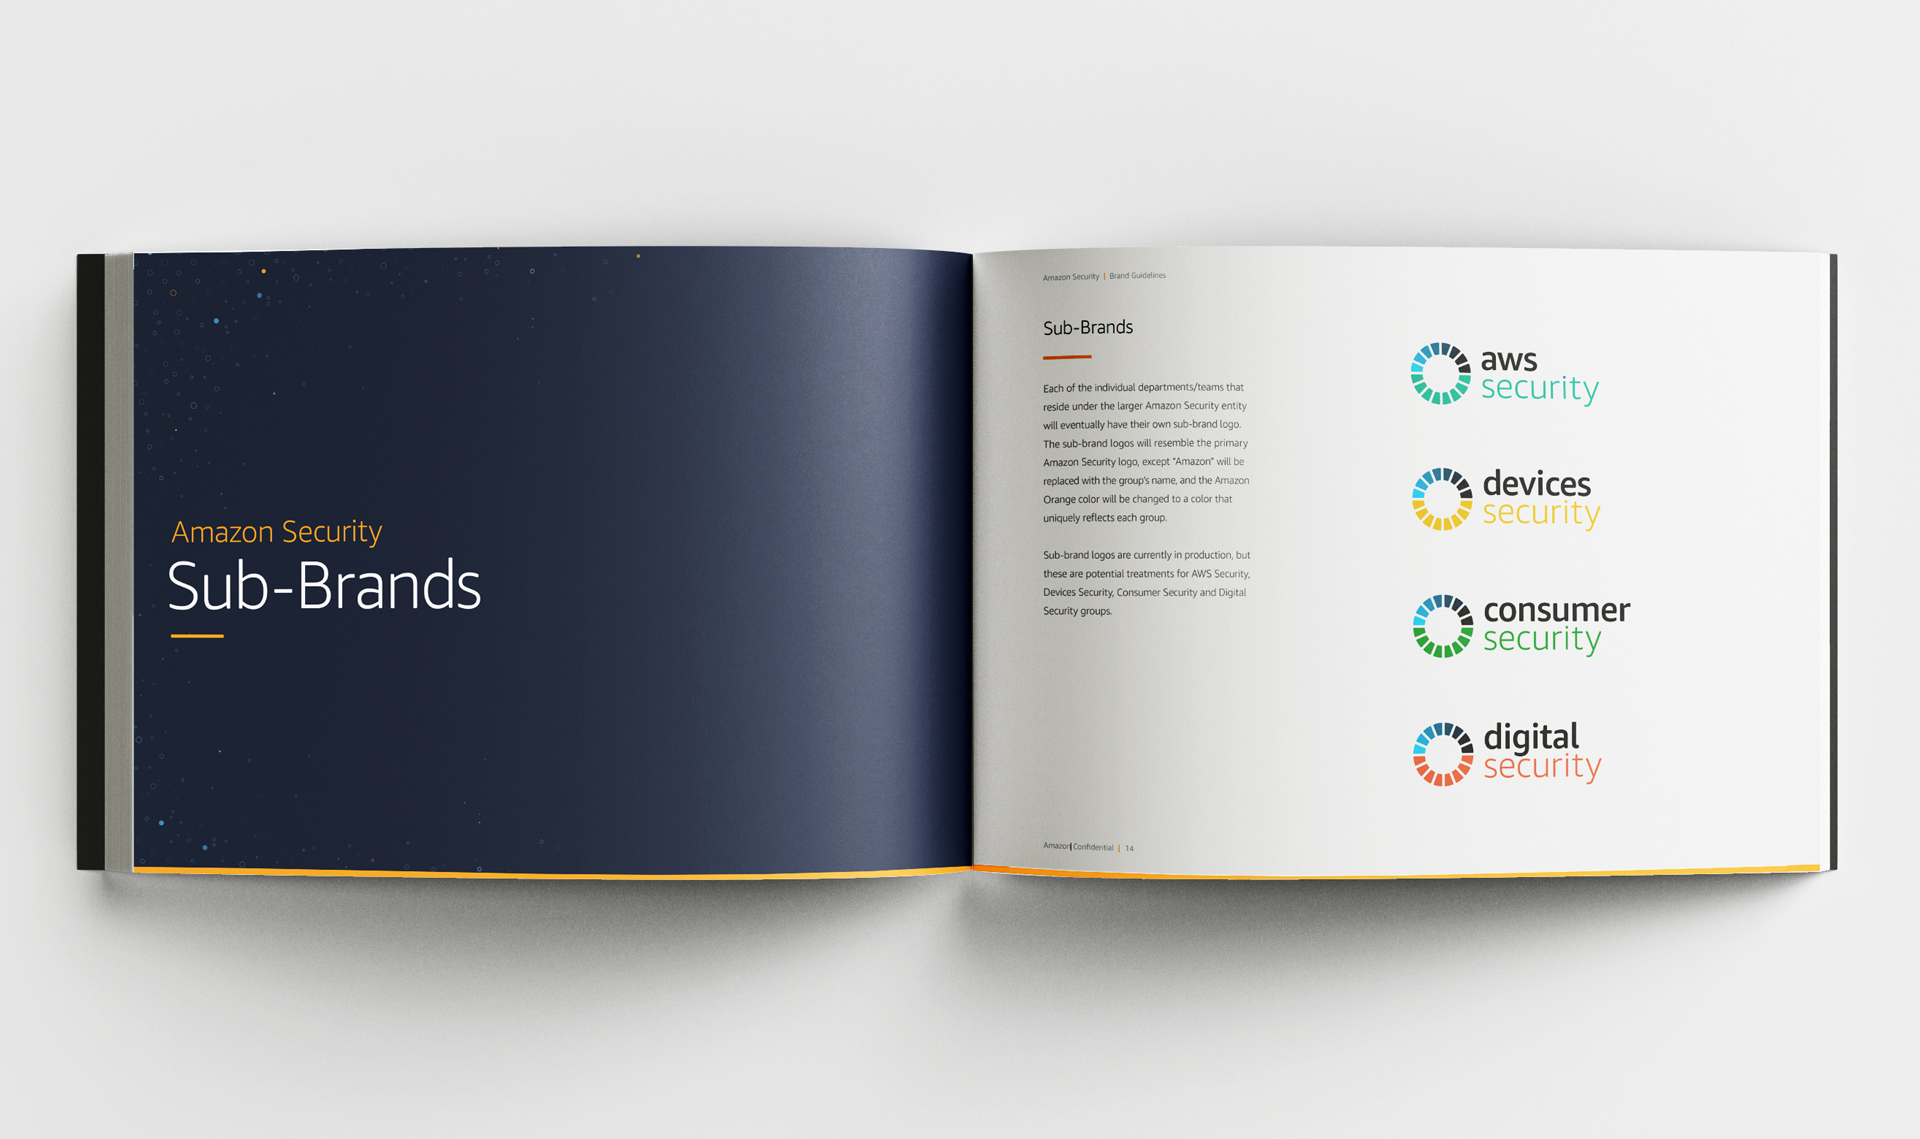 Amazon Security brand book showing alternate logos created by Incubate Design for Amazon